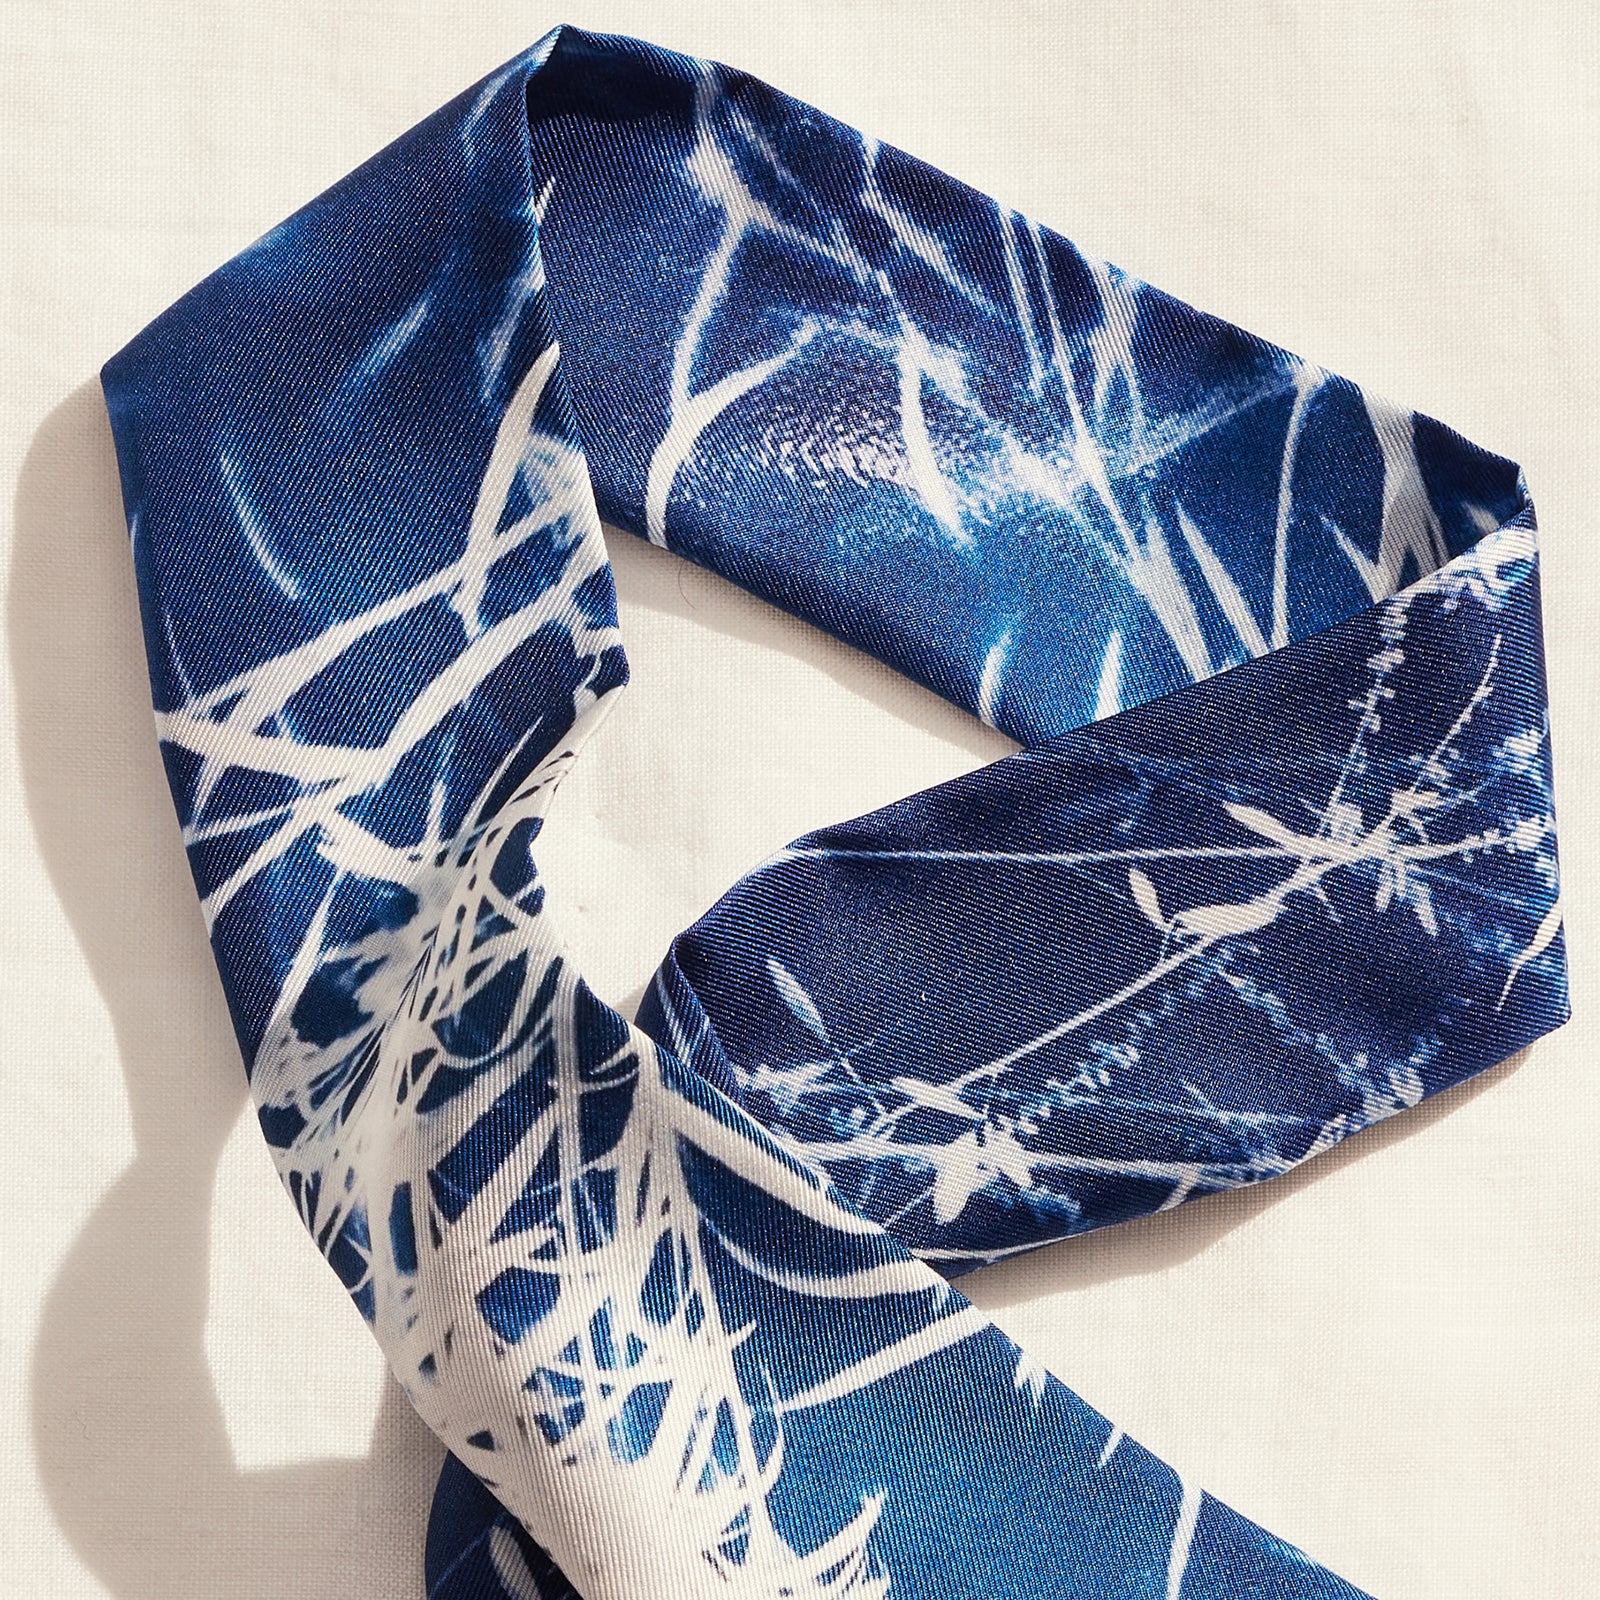 limited edition of 80, 5cm x 86cm, Made in Italy, 100% silk twilly scarf made in Artist Deni Javas’s signature cyanotype style